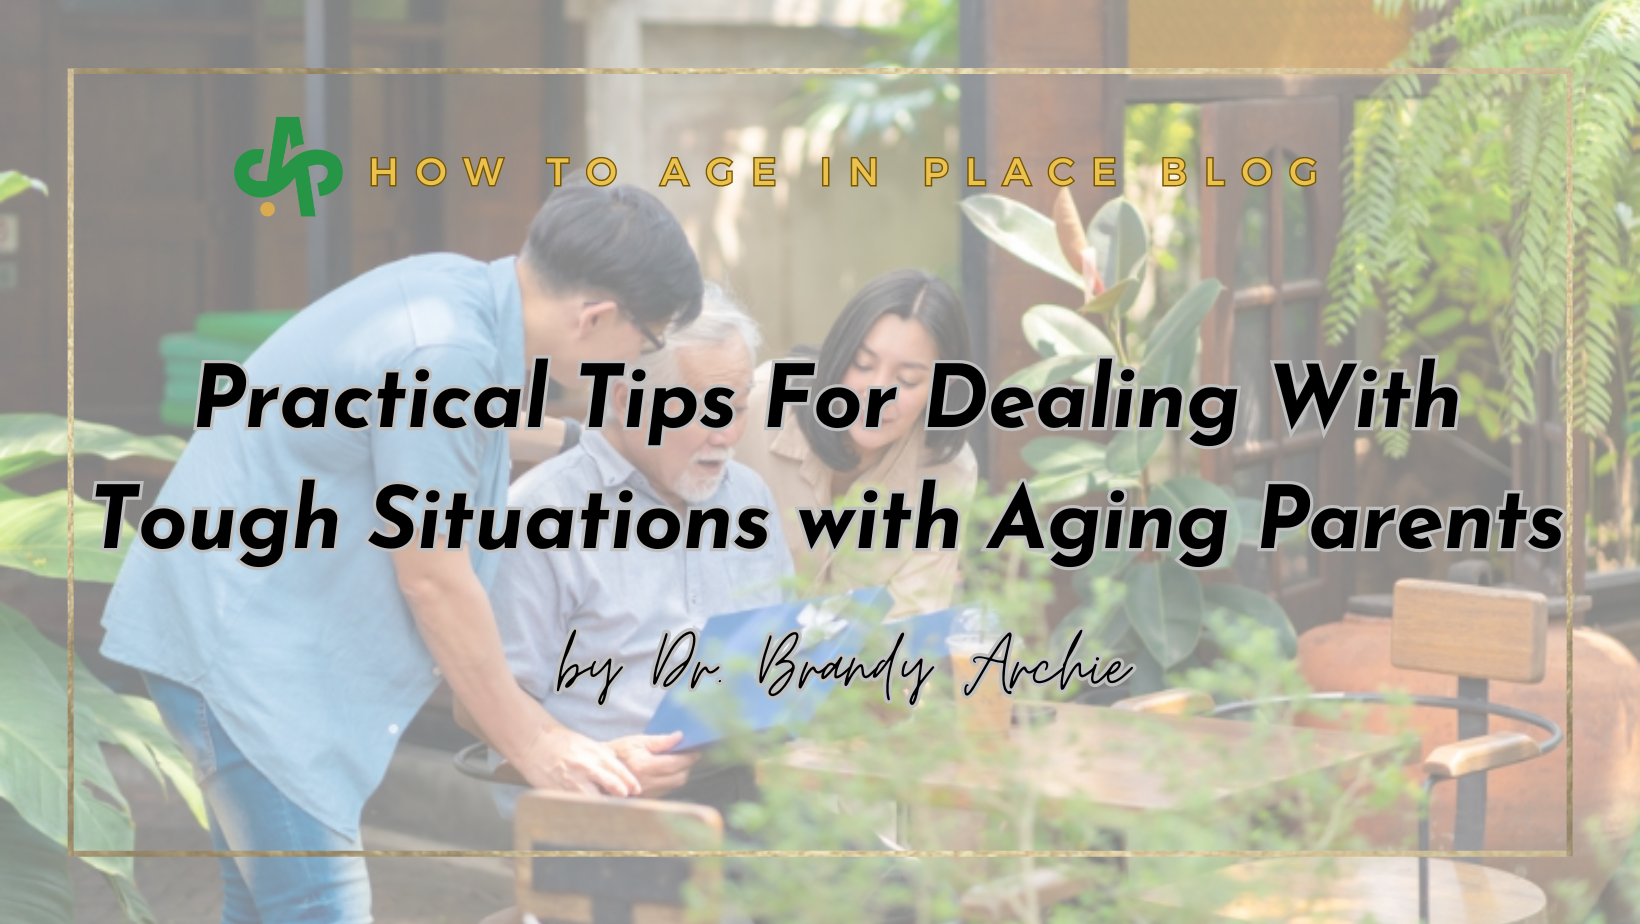 Practical Tips For Dealing With Tough Situations with Aging Parents